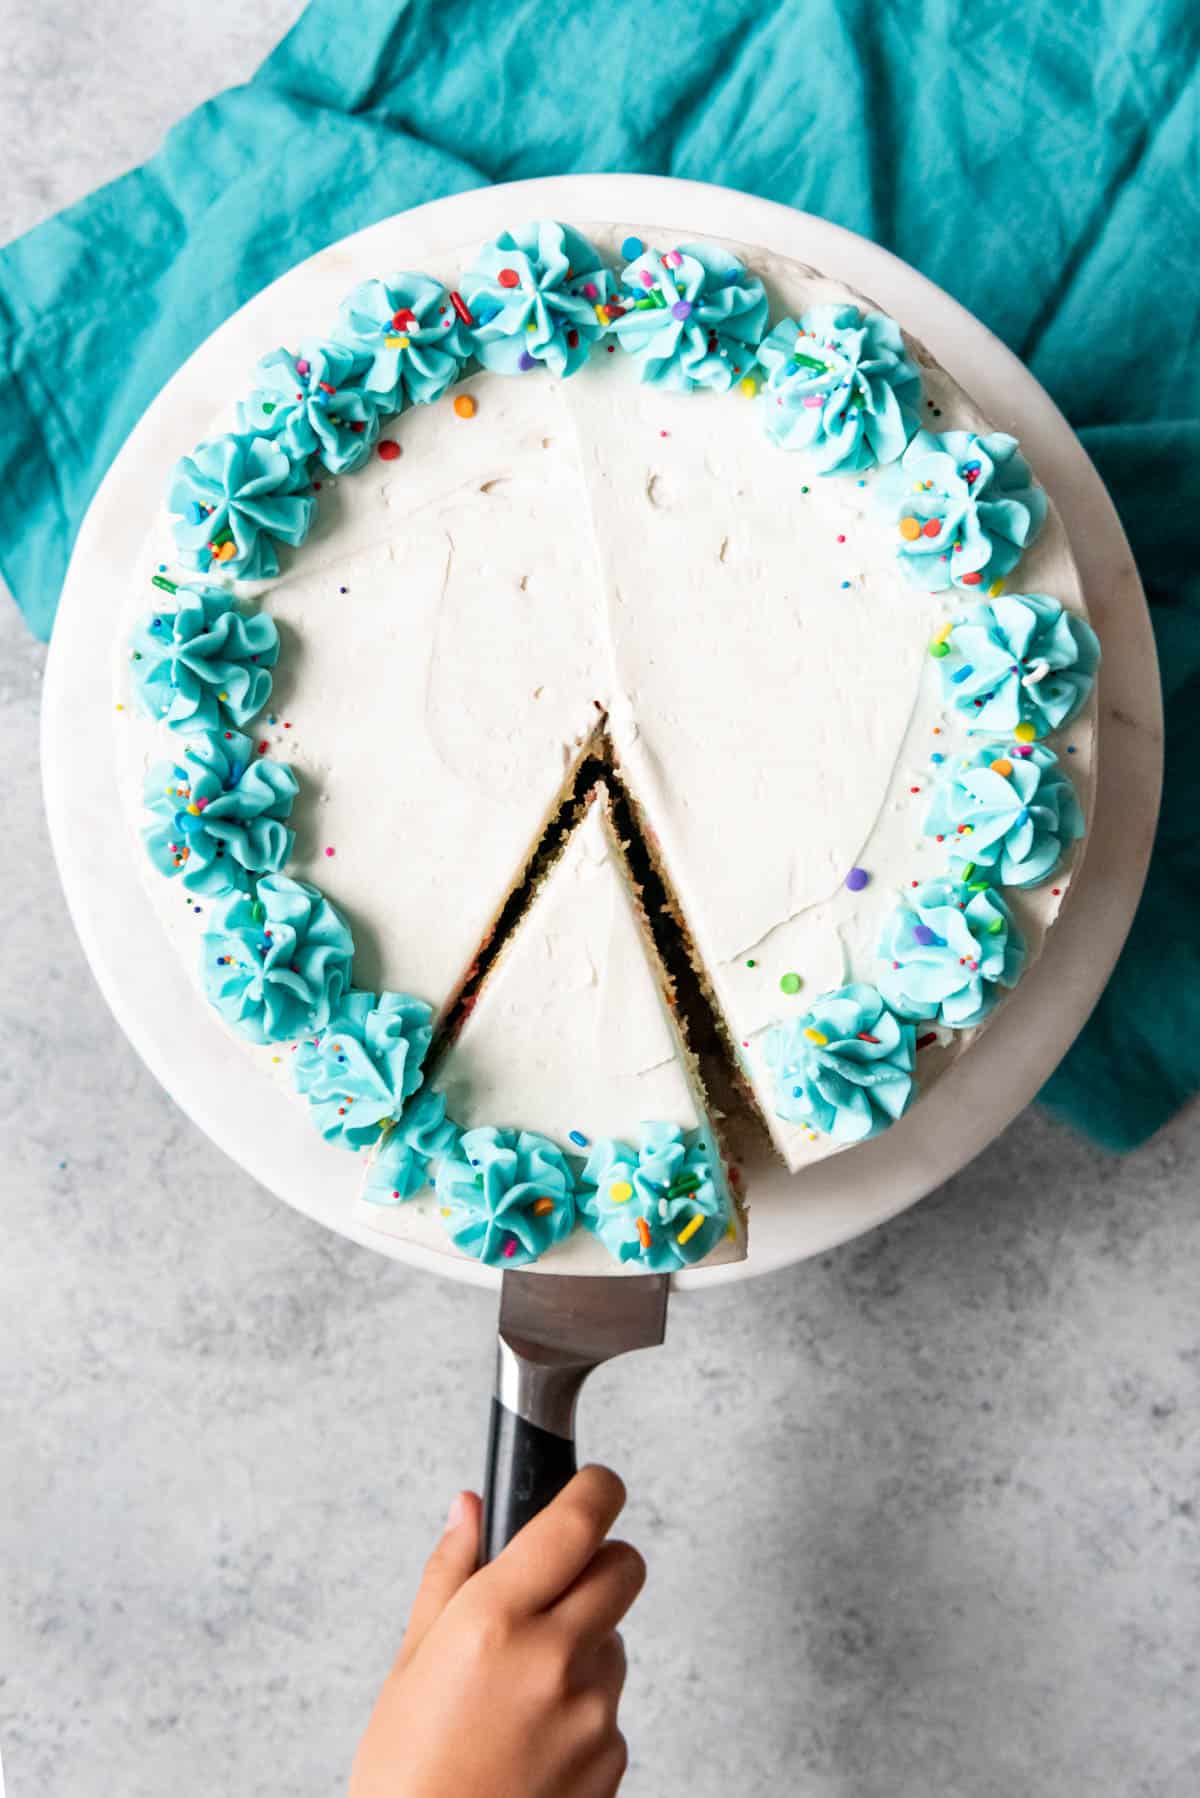 An image of one slice of homemade confetti cake being removed from the cake plate.